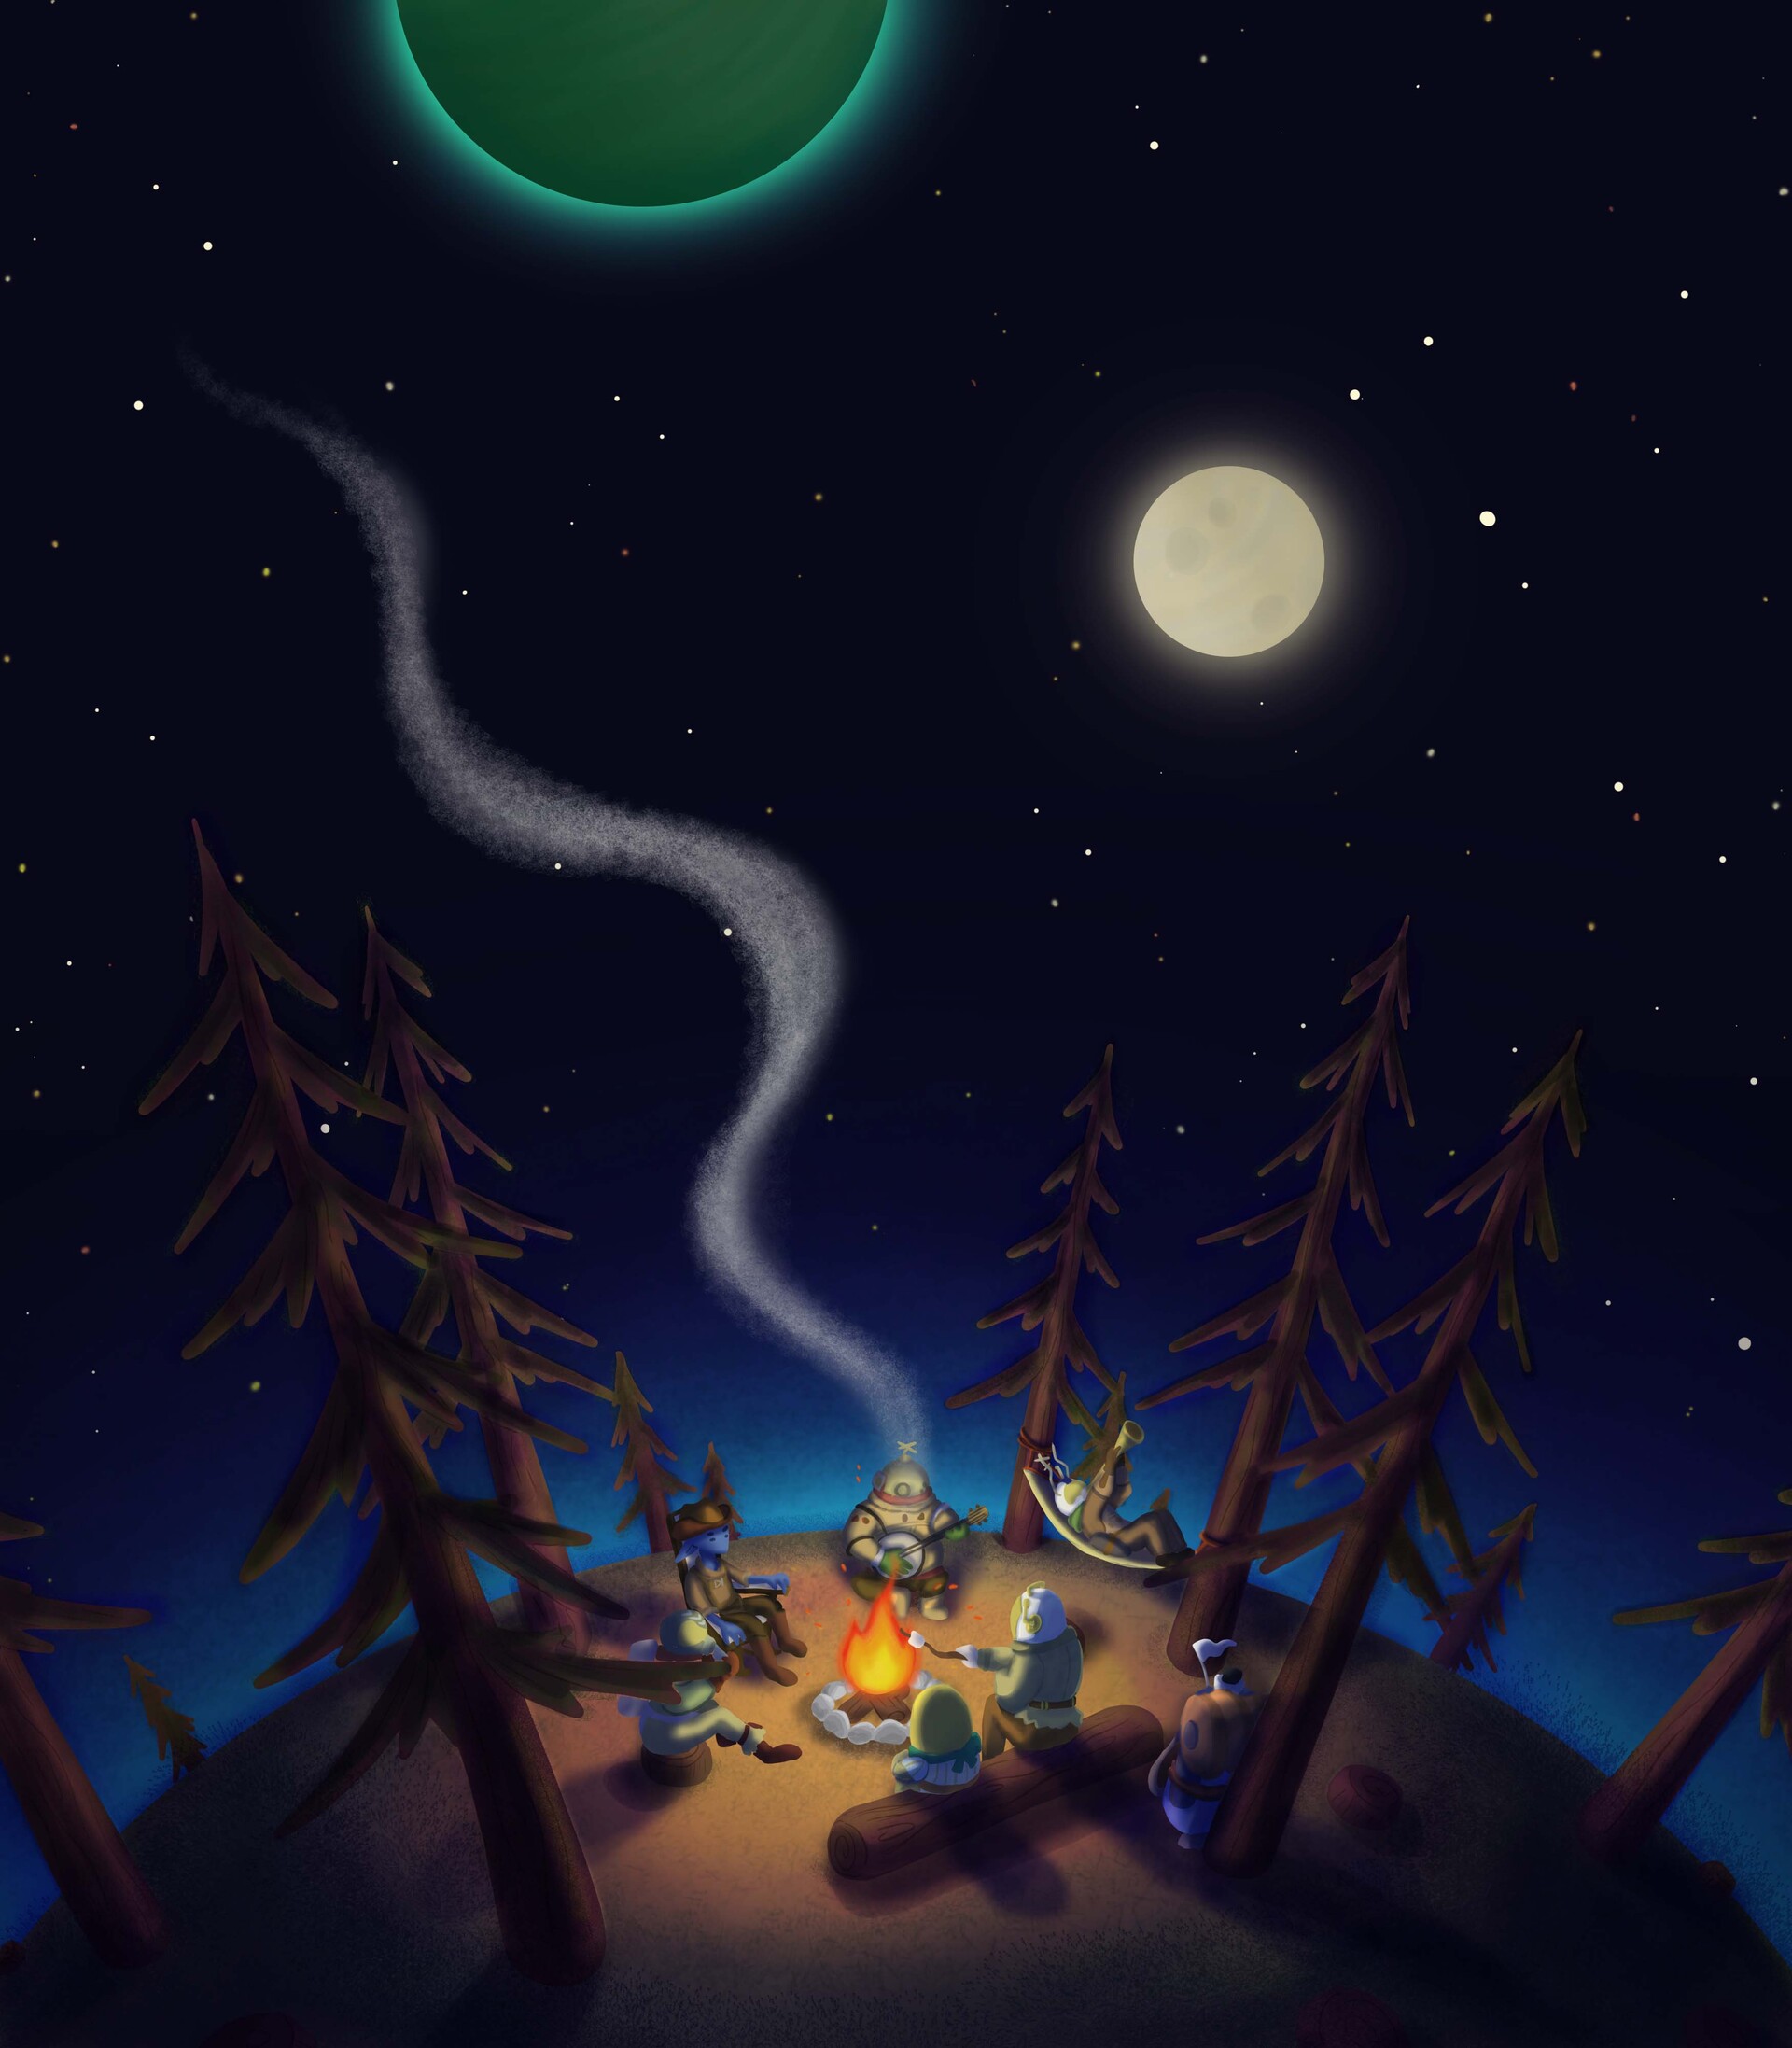 ArtStation - Outer Wilds